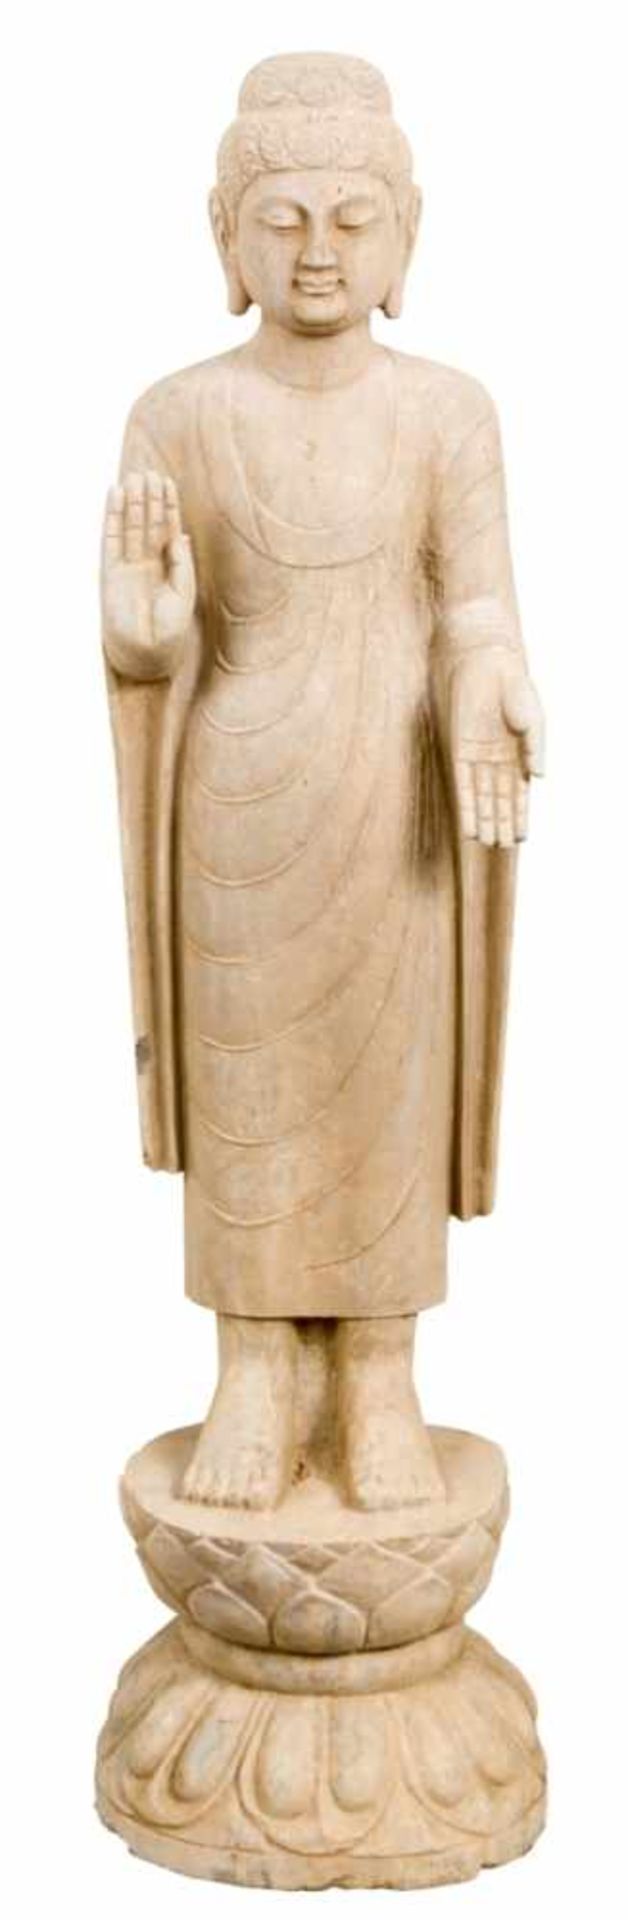 Monumental Sandstone Buddha Sculpture probably: China, before 1900, ca. 137 cm high,